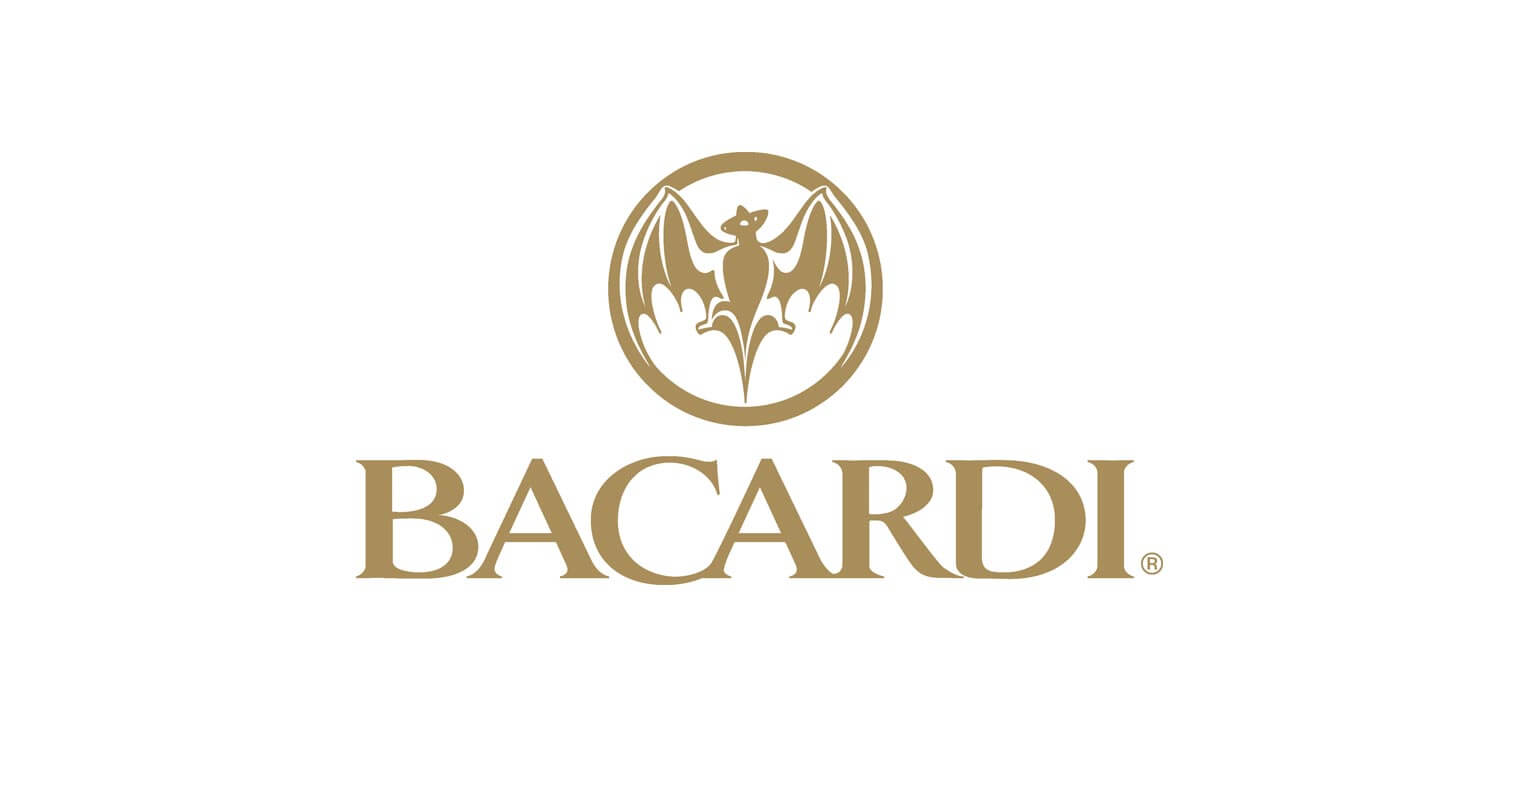 Bacardi Named One of World’s Most Reputable Companies, featured image